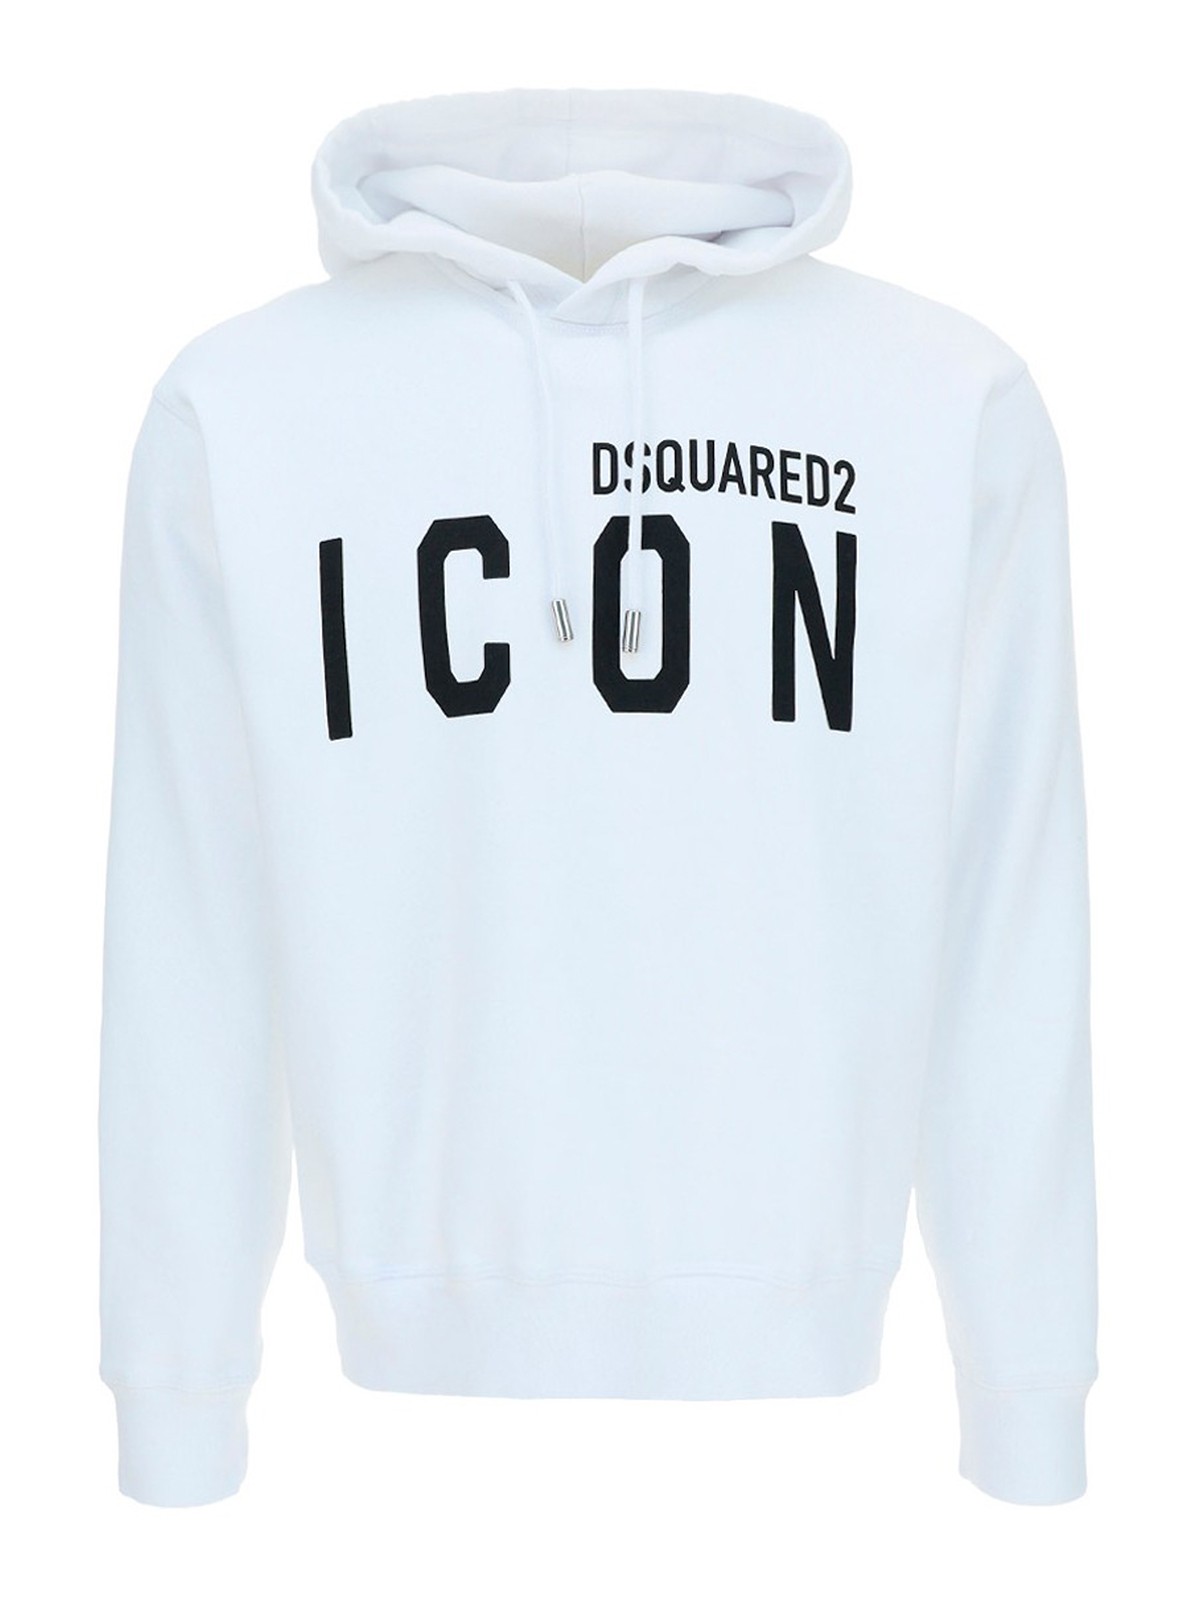 dsquared2 icon hoodie